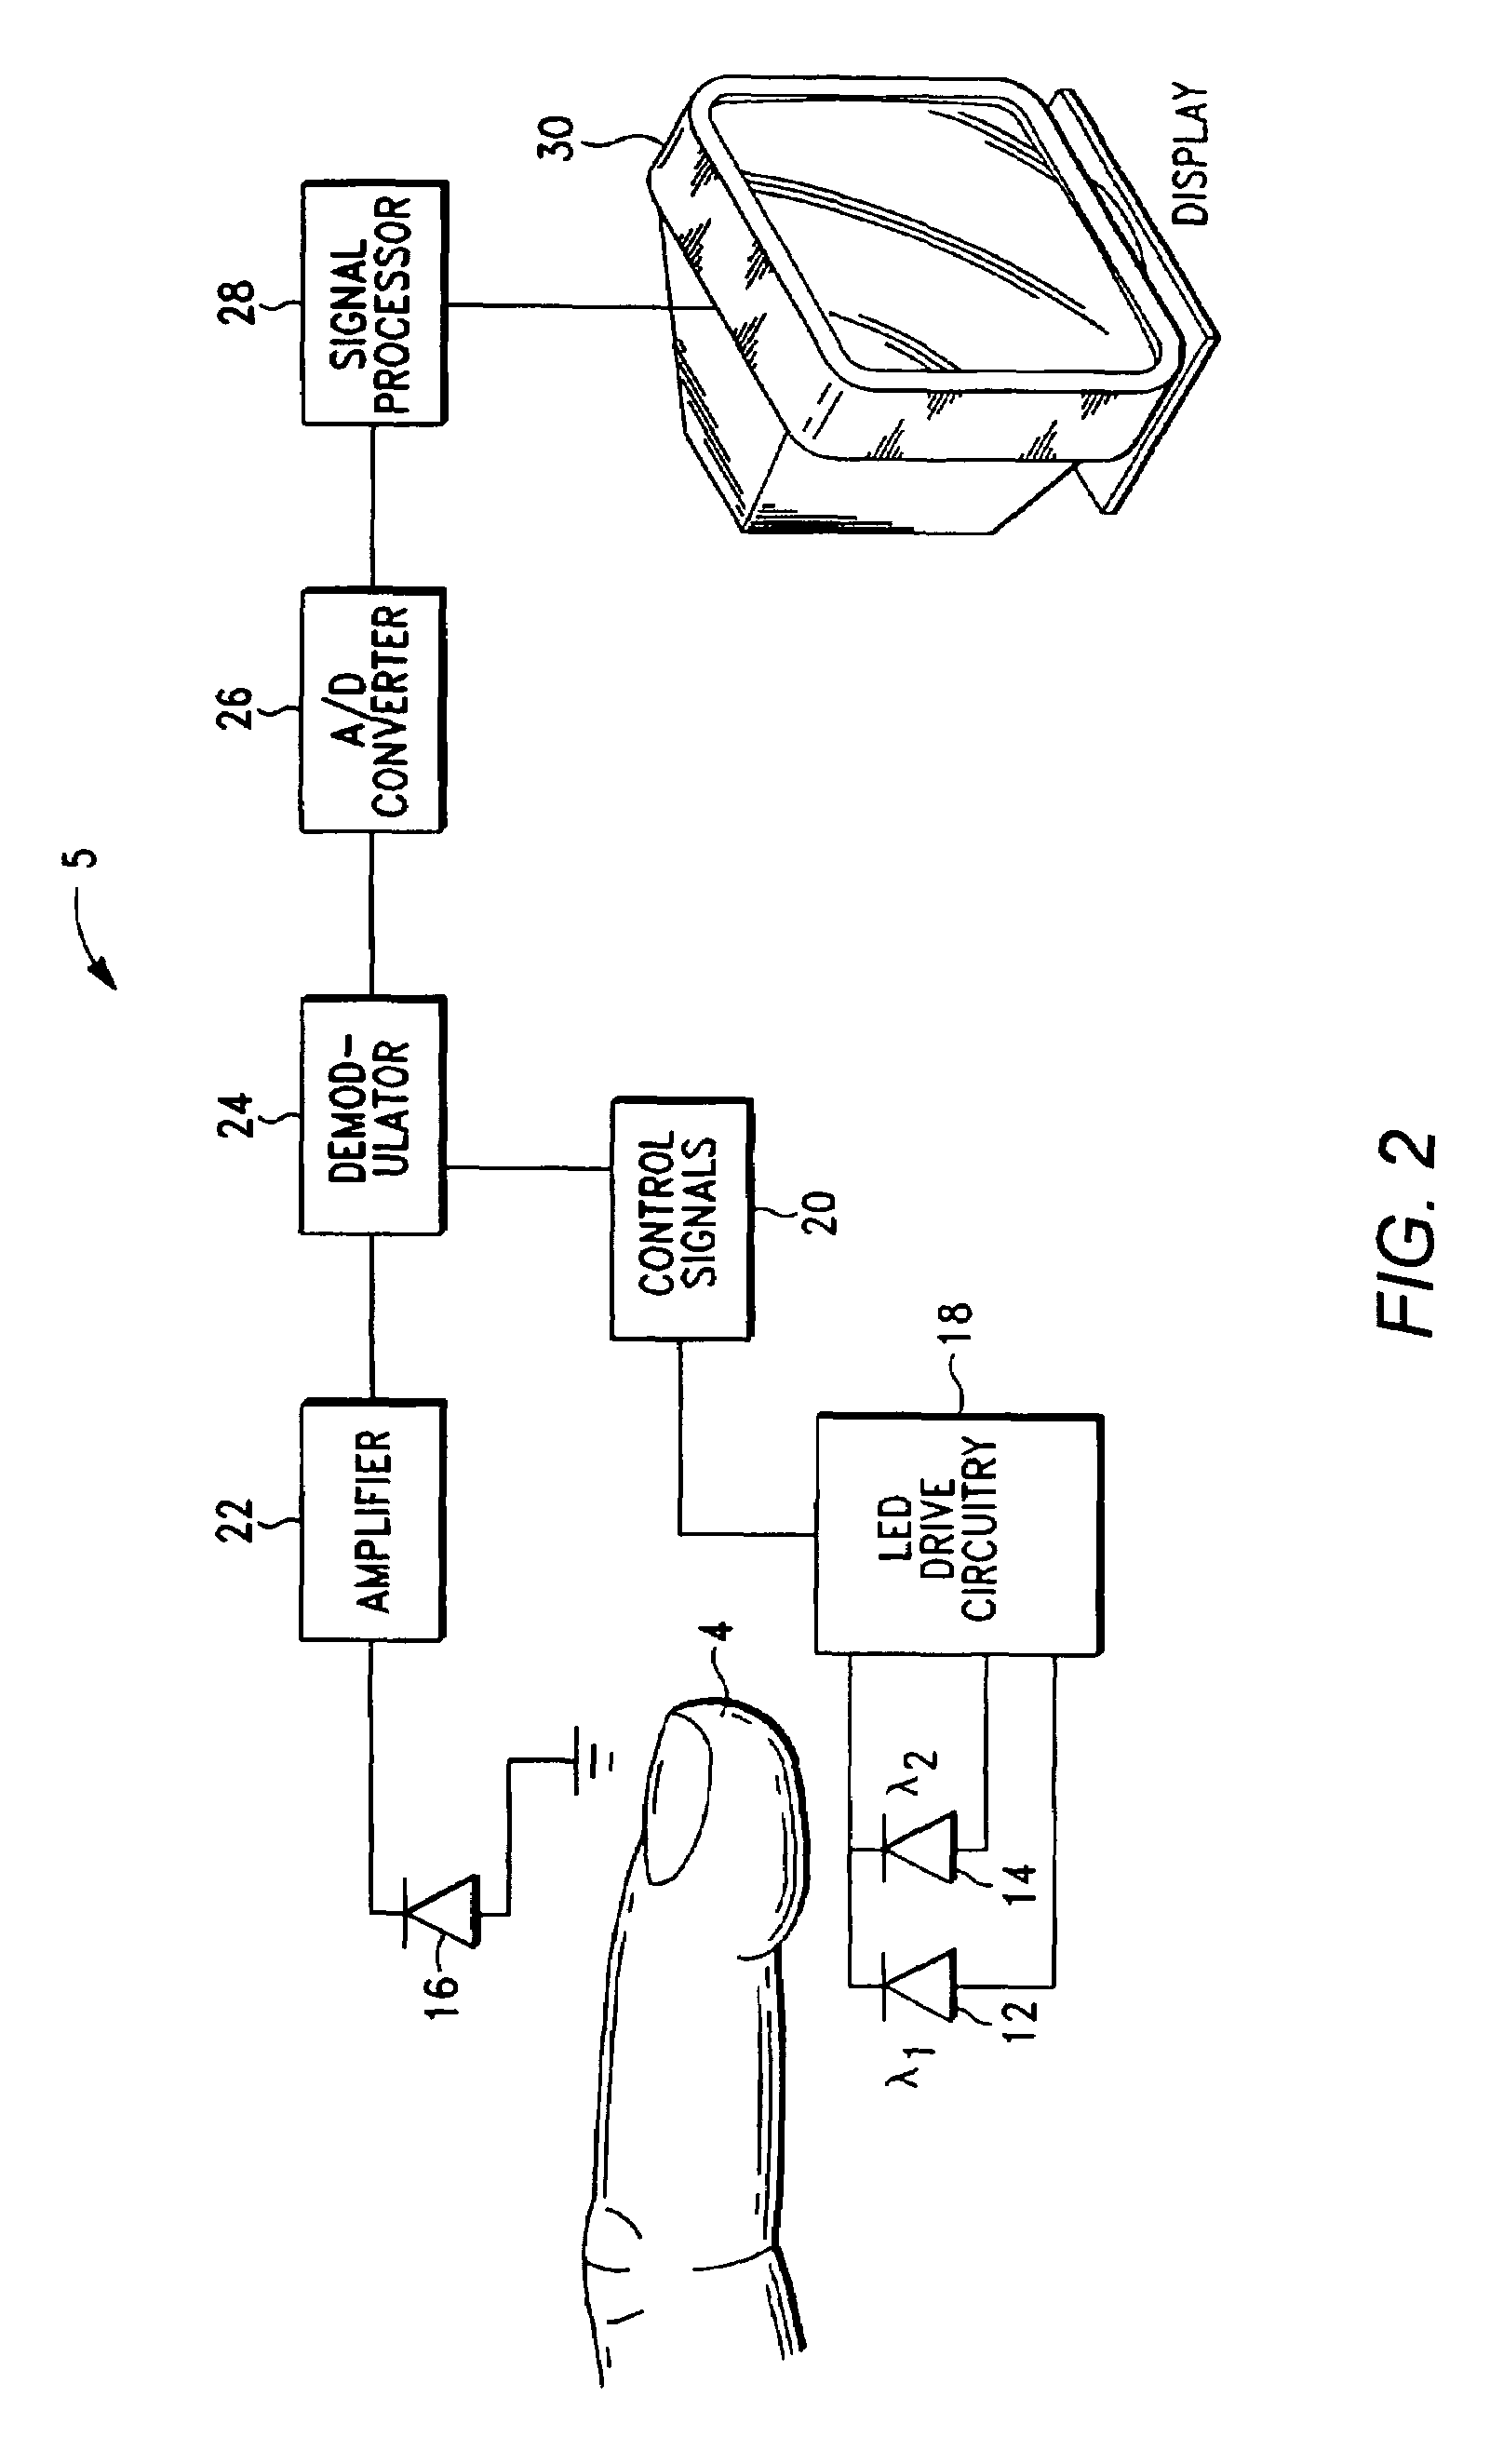 Method and apparatus for processing signals reflecting physiological characteristics